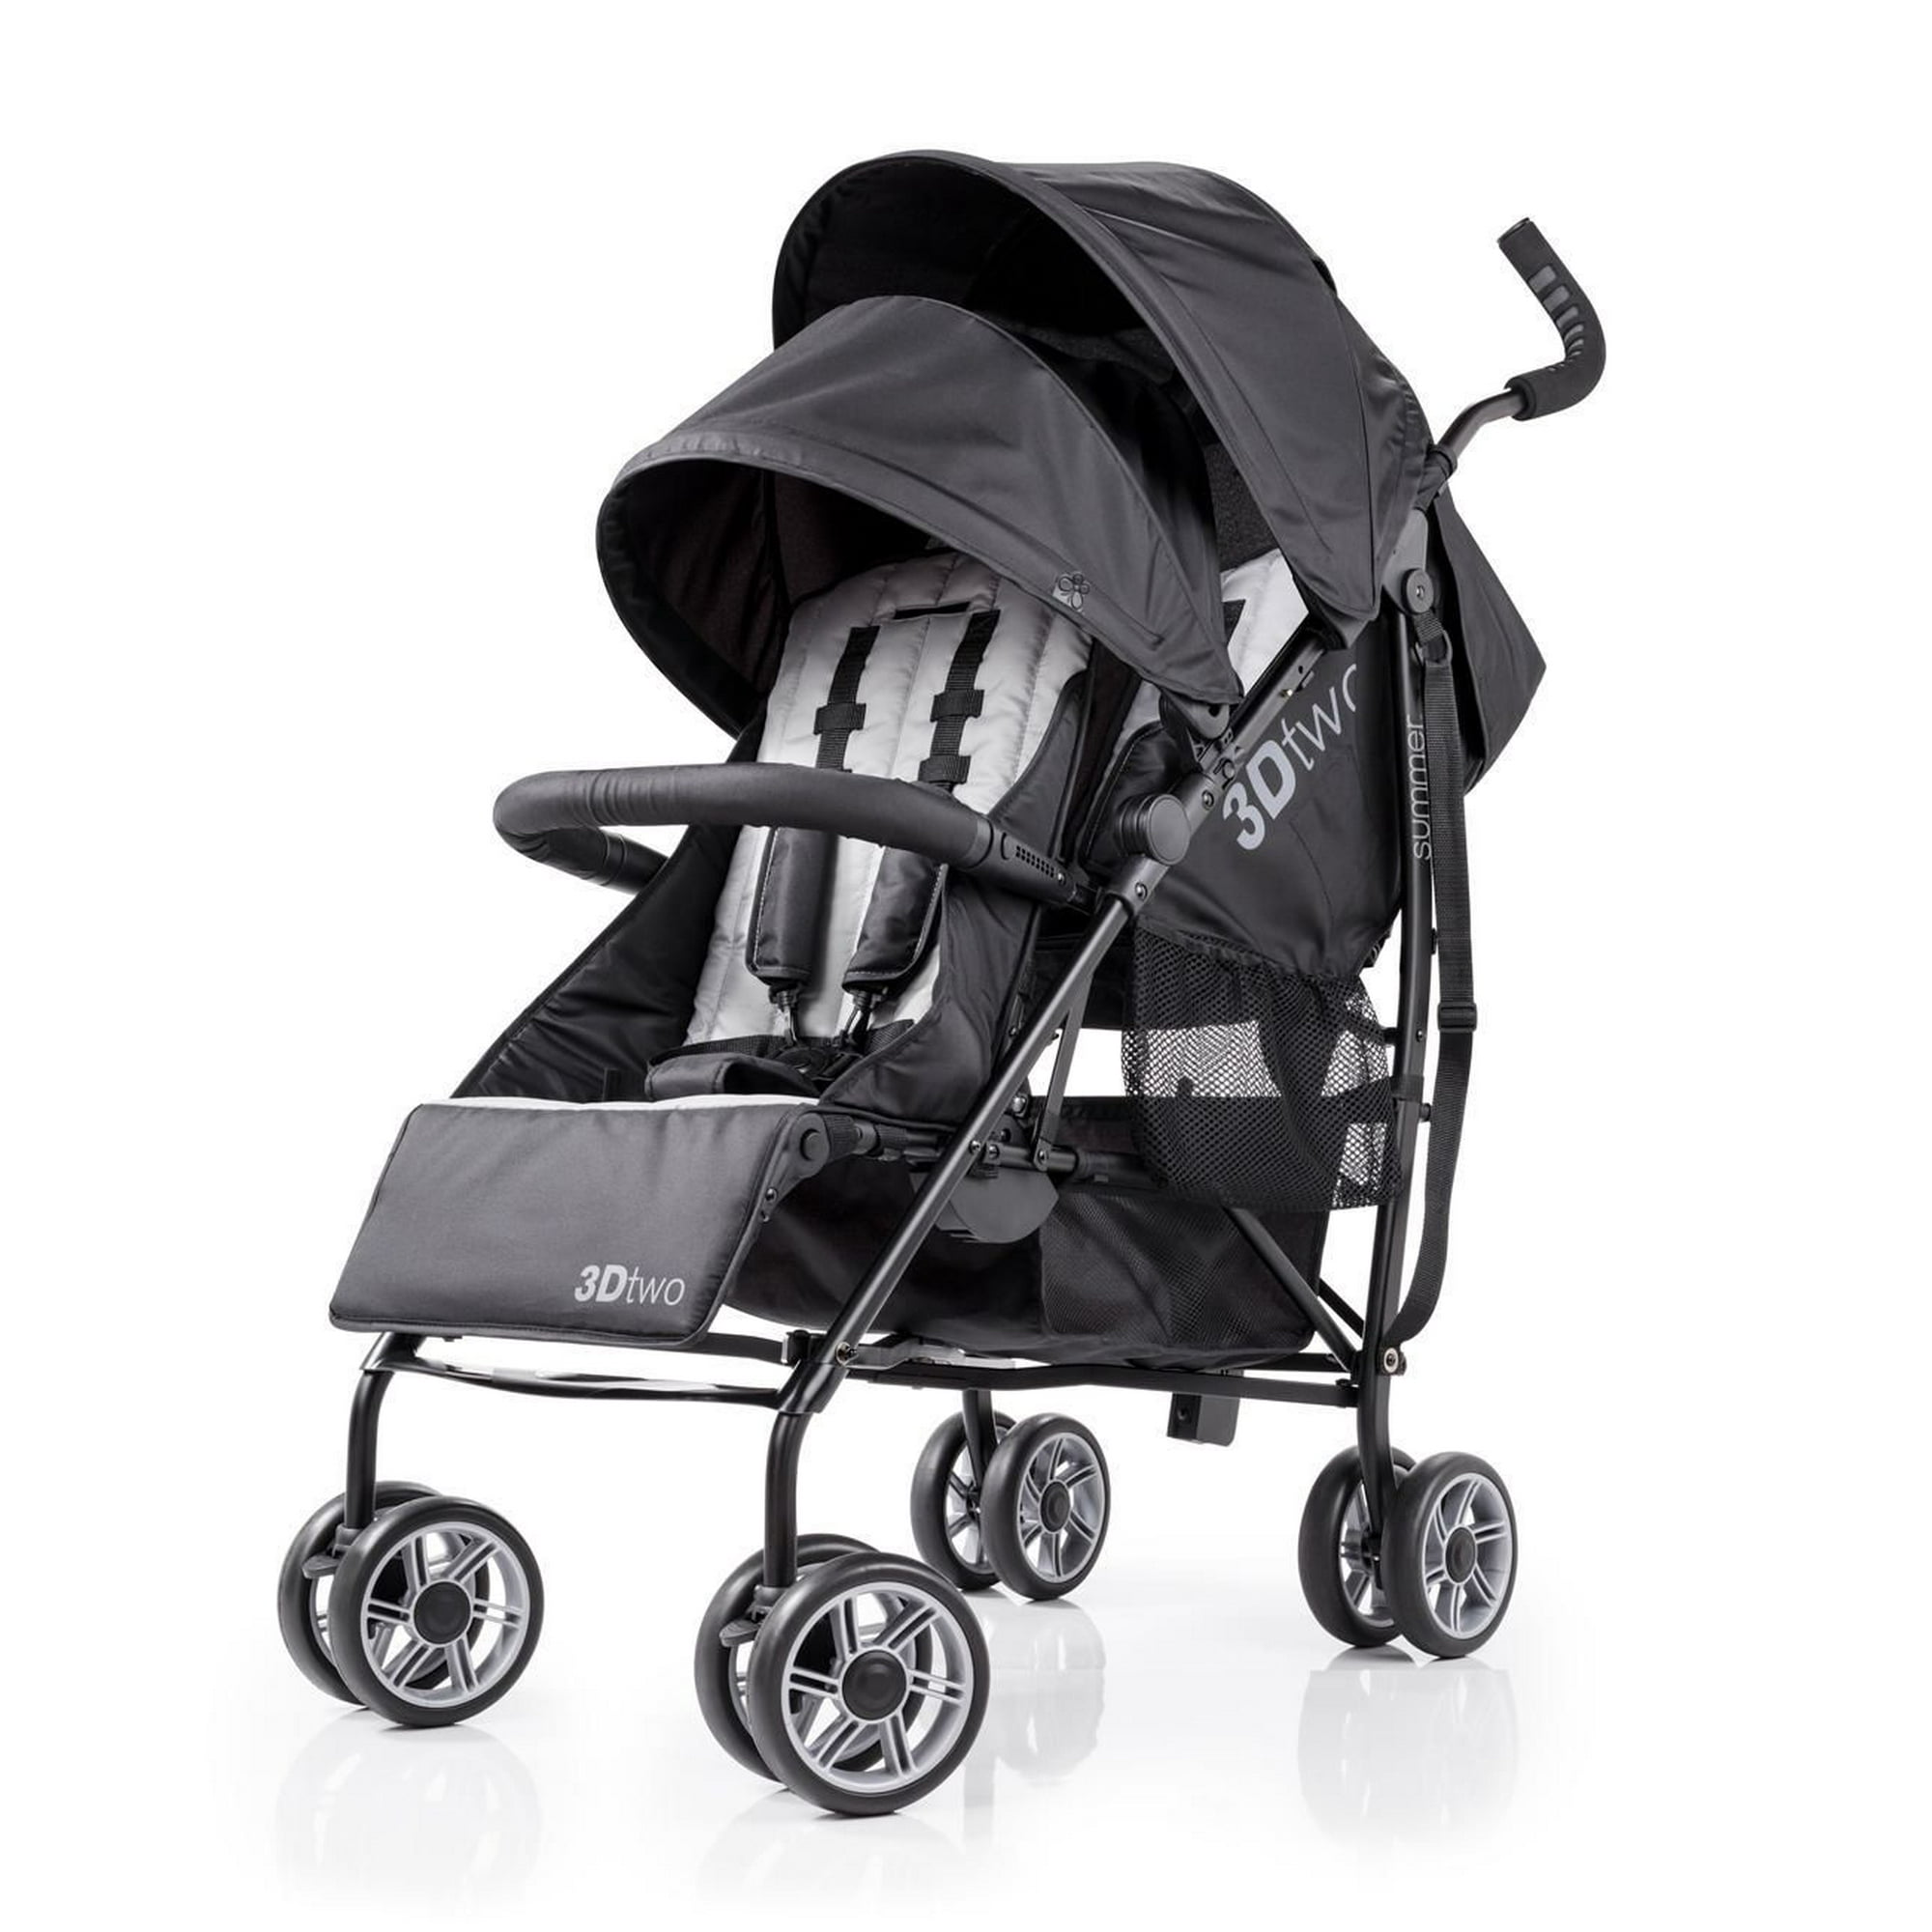 Summer Infant 3Dtwo Double Convenience Stroller - Black 